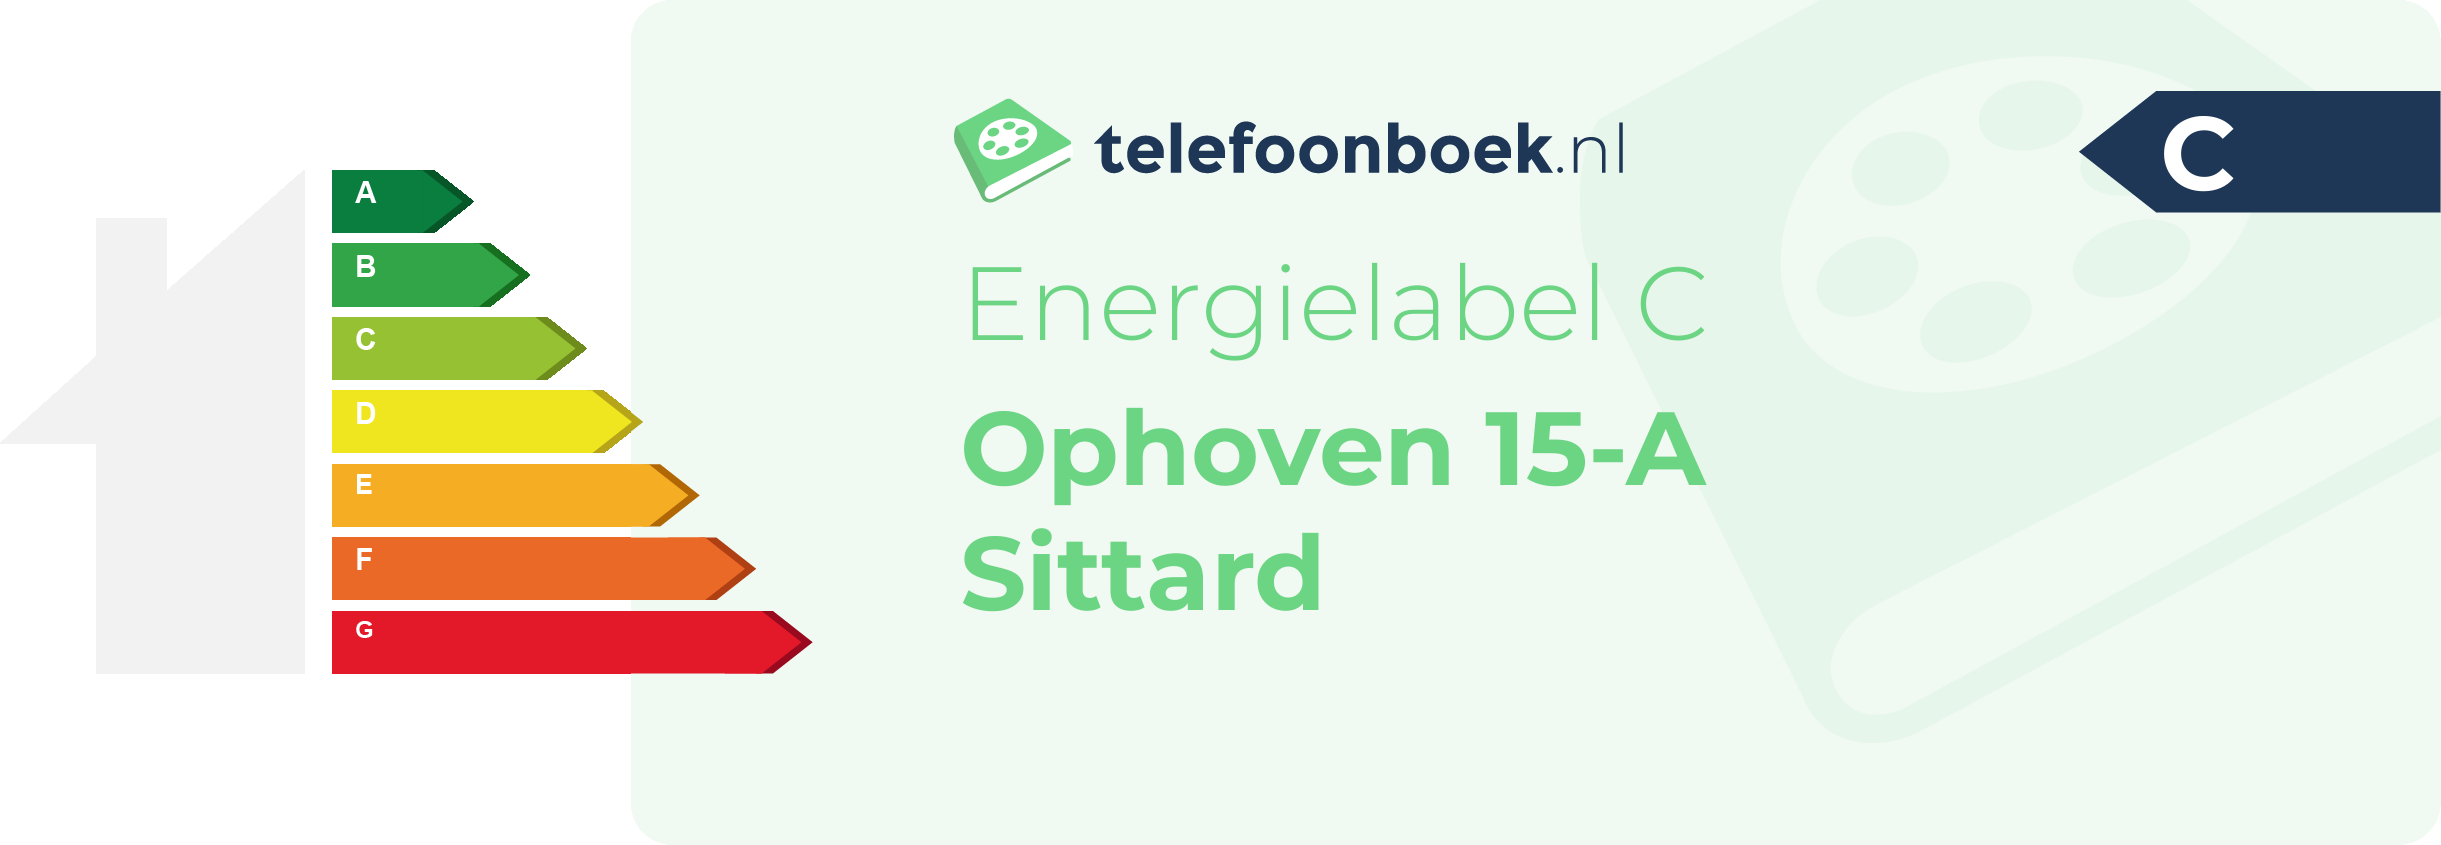 Energielabel Ophoven 15-A Sittard